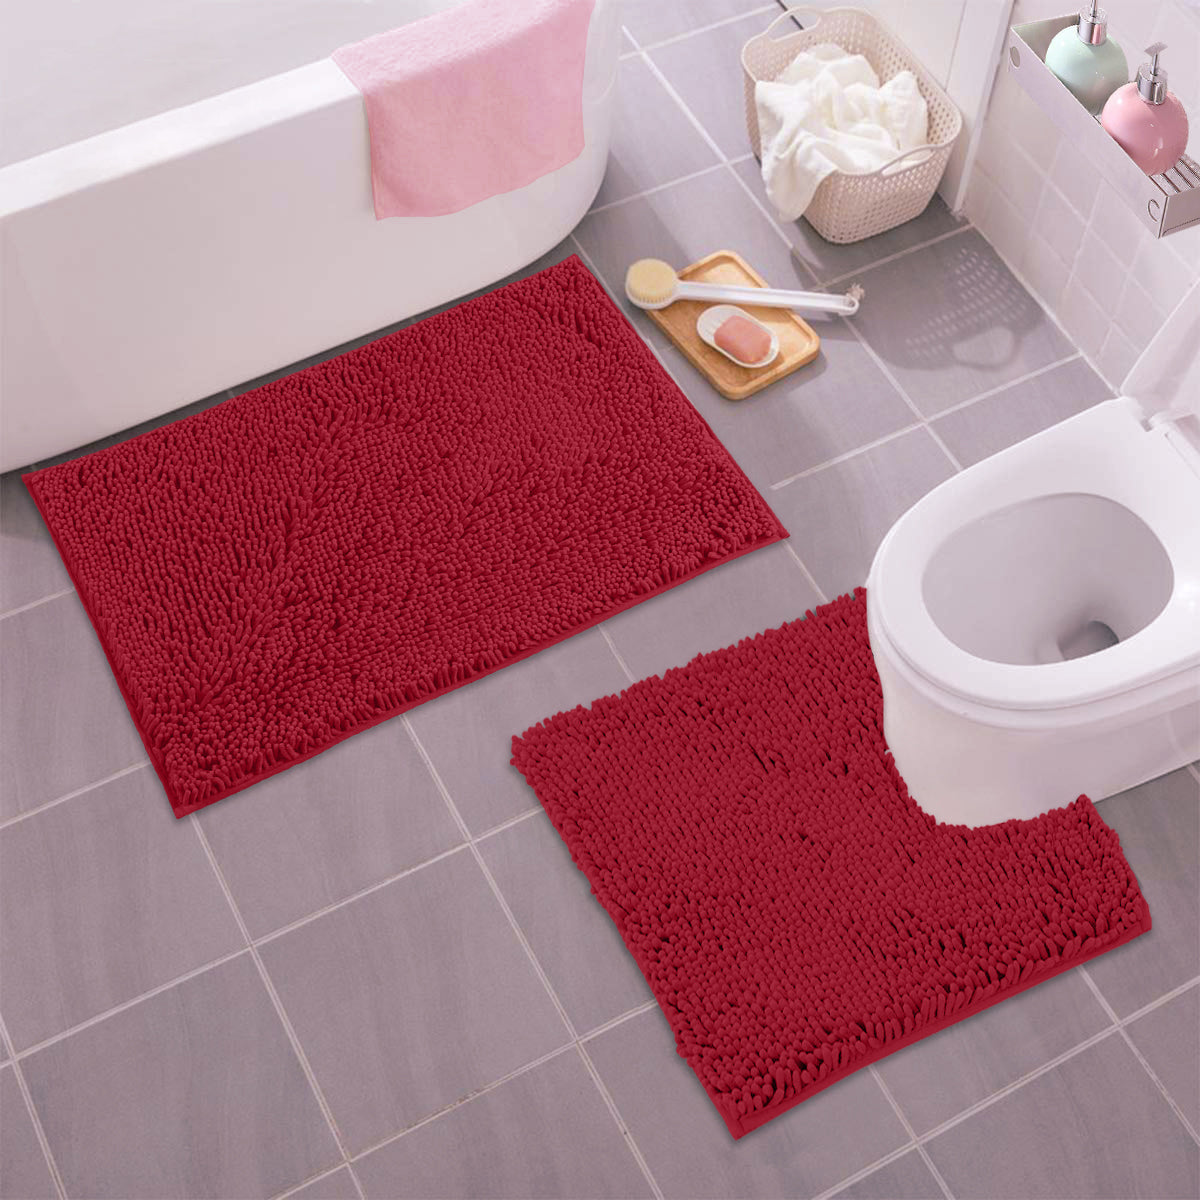 H.VERONNEX Luxury Chenille Red Bathroom Rugs Sets 2 Piece, Thickened Hot  Melt Rubber Bottom Bath Mats for Bathroom Non Slip,Bath Rugs Quick Dry